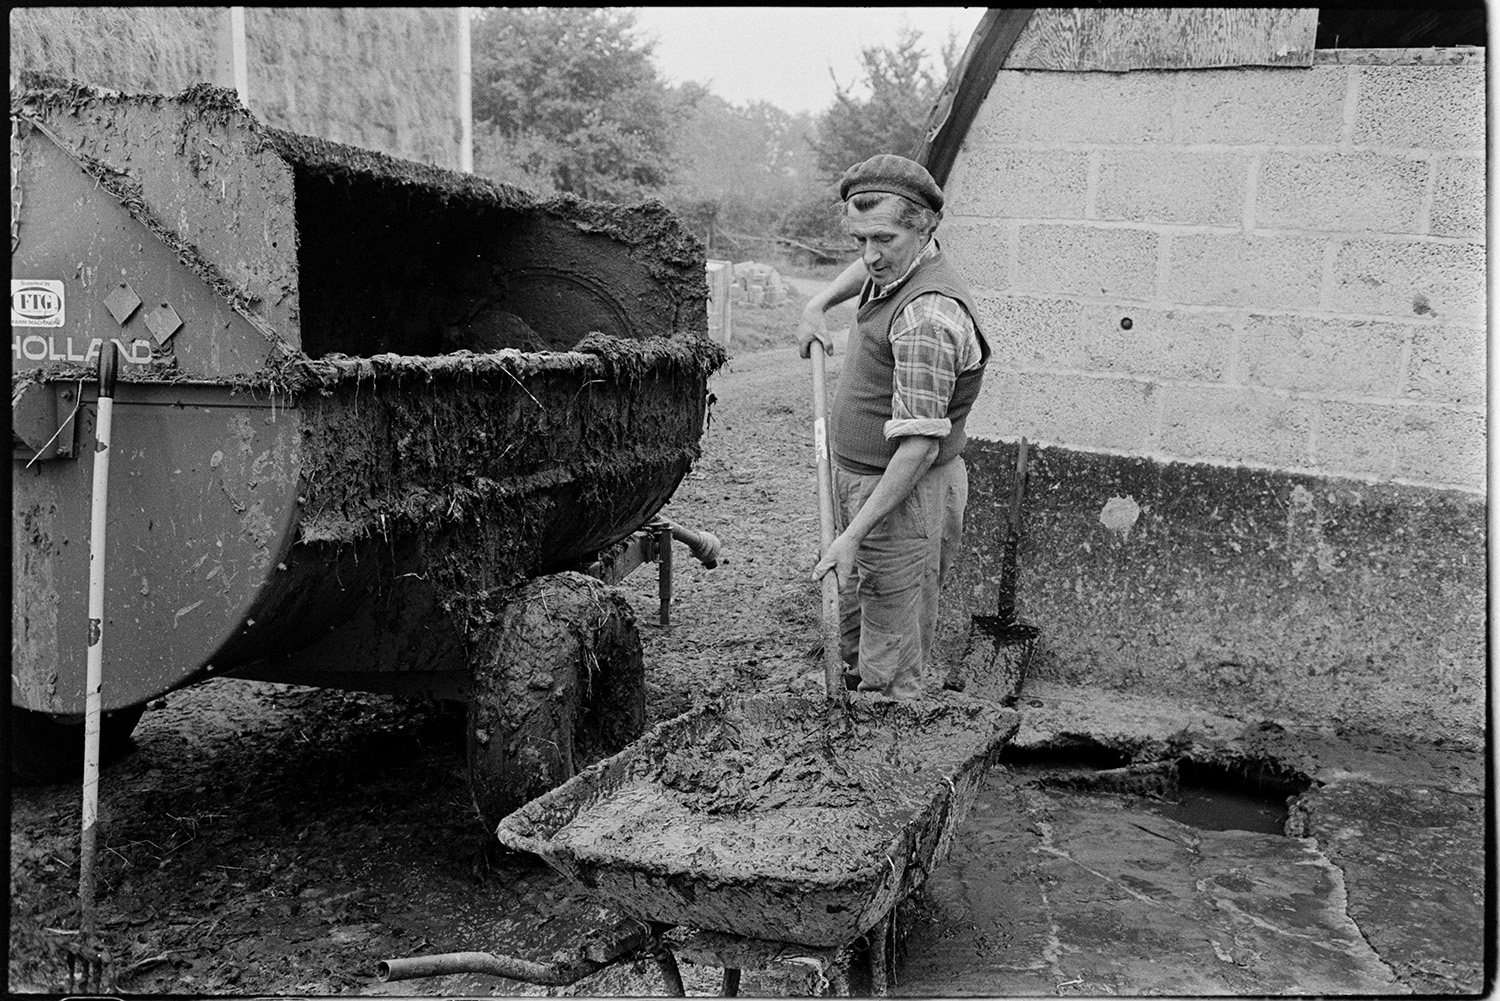 Farmer washing out milking parlour after milking and taking muck out in wheelbarrow. 
[William Medland shovelling muck from a wheelbarrow into a muck spreader in the farmyard at Hallcourt, Petrockstowe.]